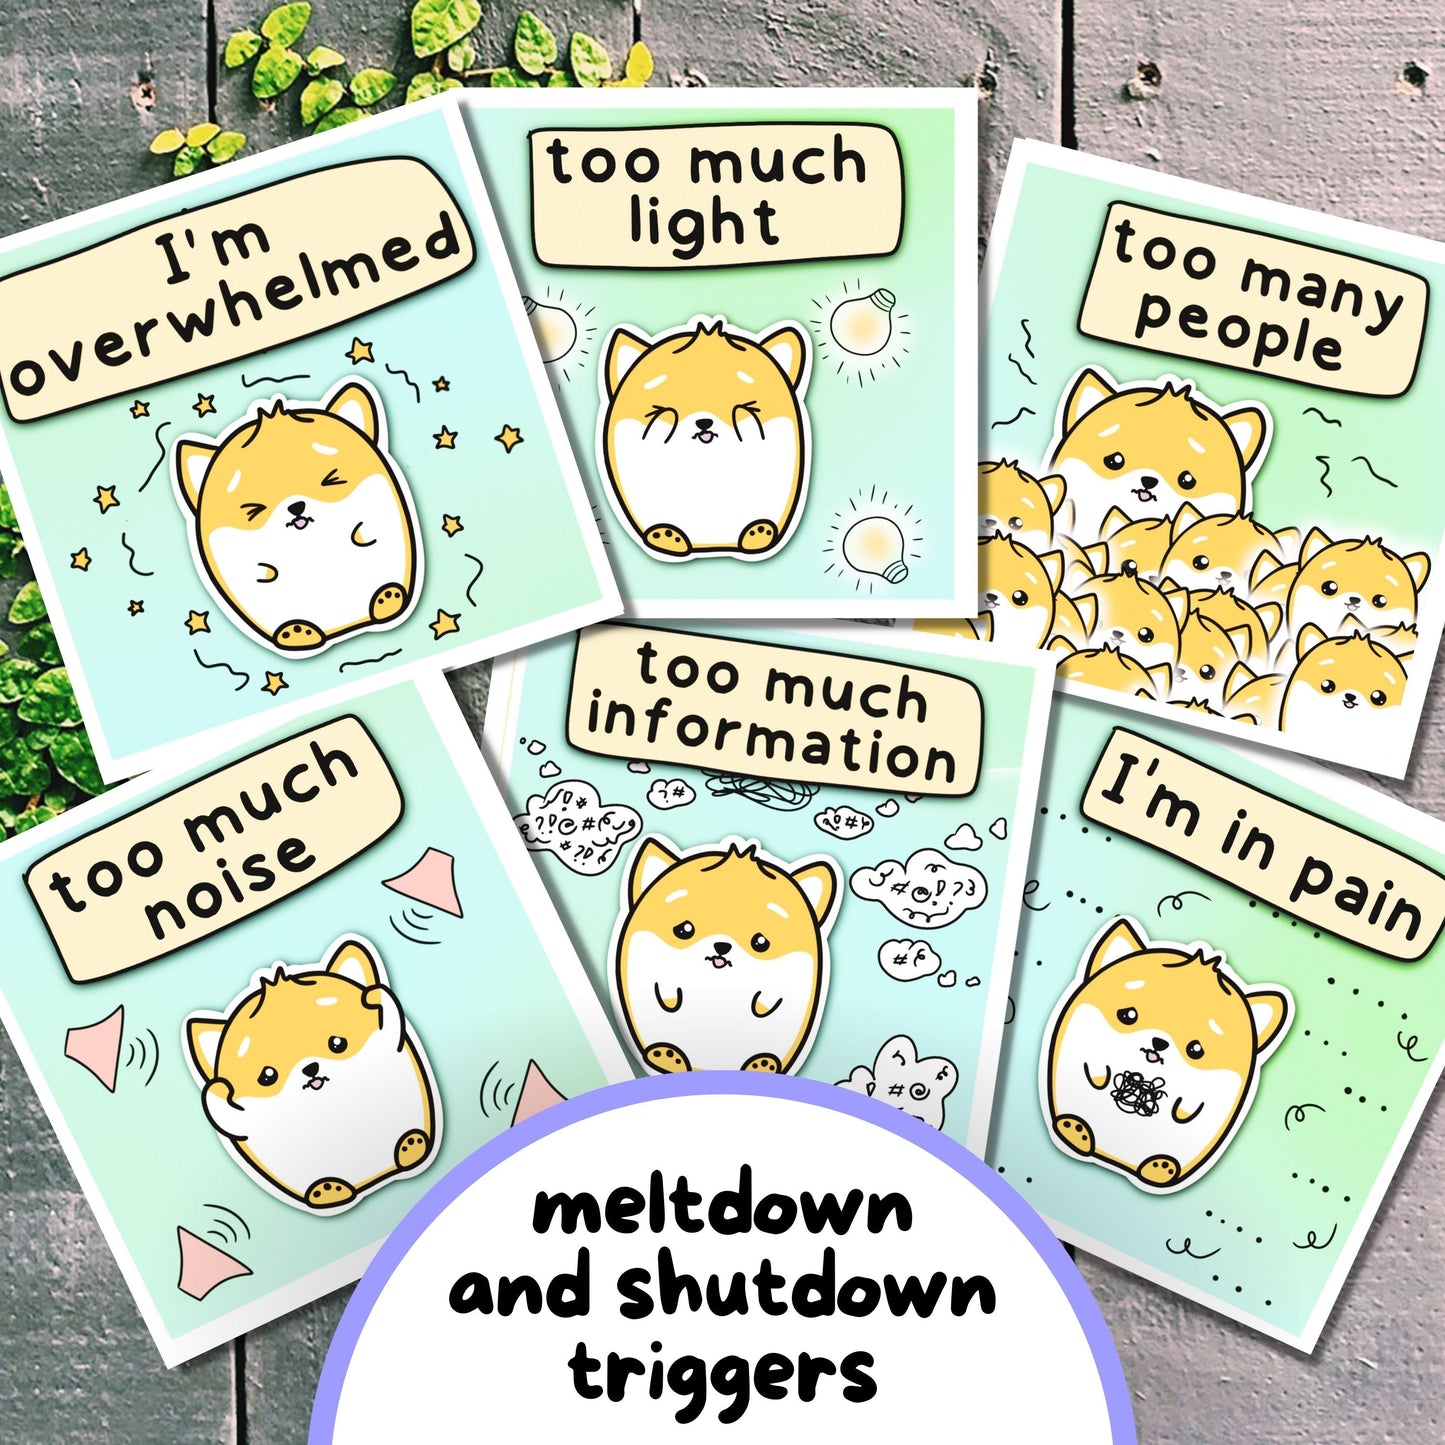 Communication Cards & Affirmation Cards (Digital) ft. Kifli, the Dog - Private Practice Use